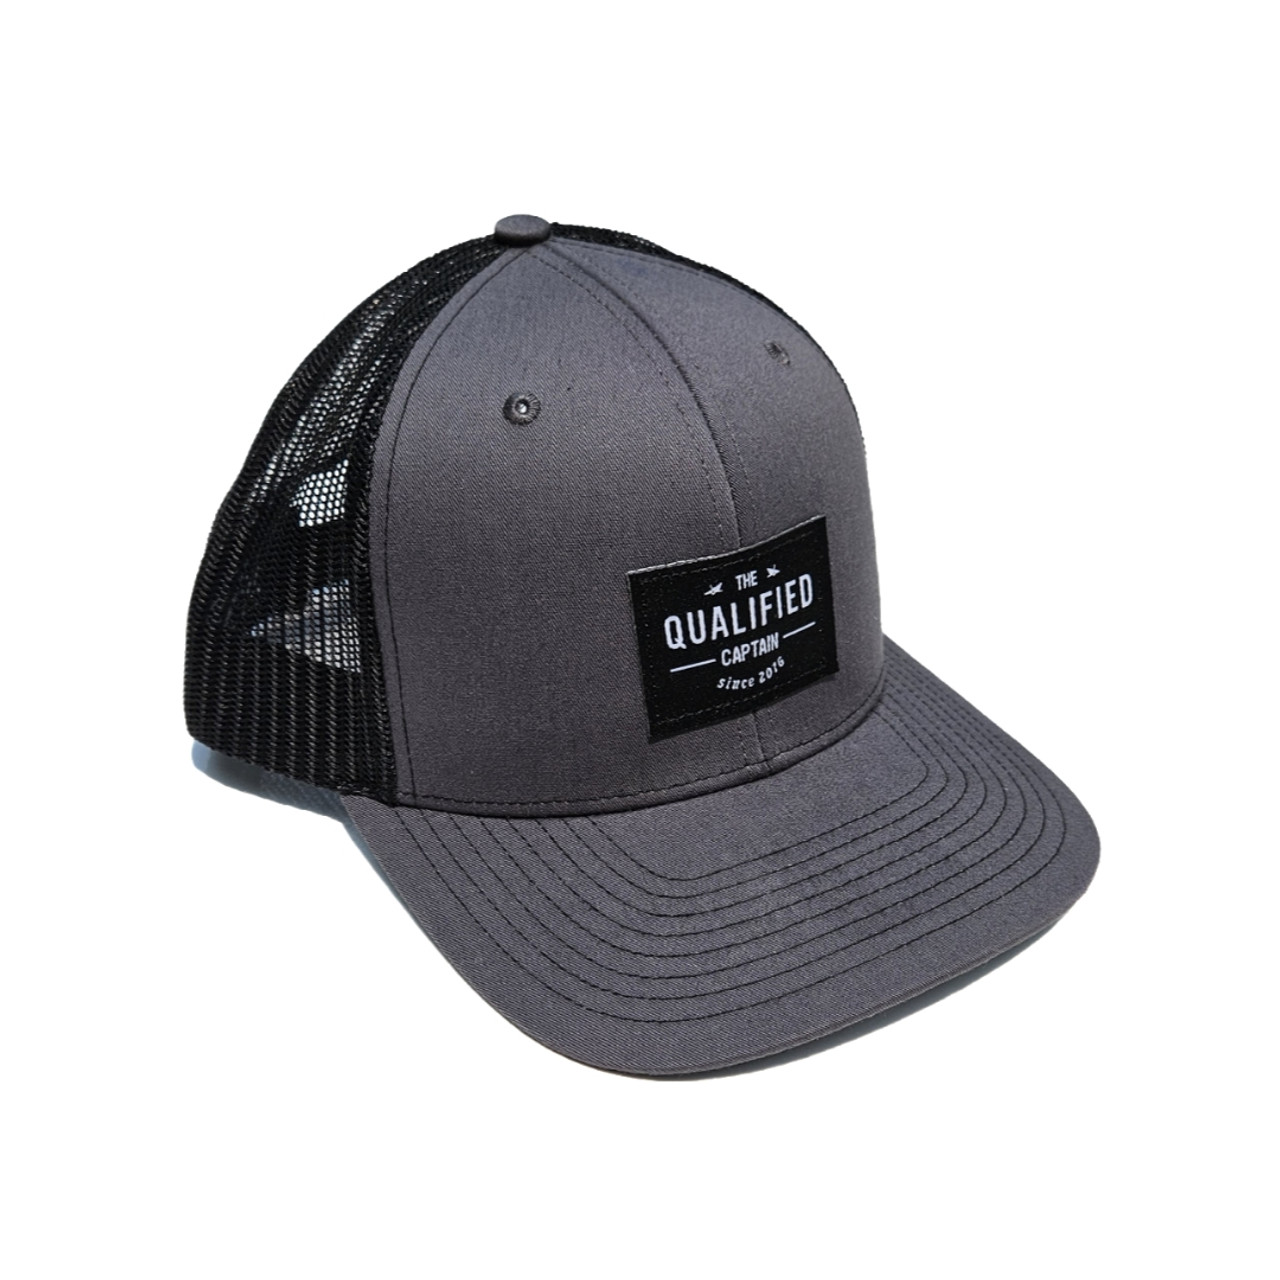 The Qualified Captain Shipwrecked Woven Label Hat